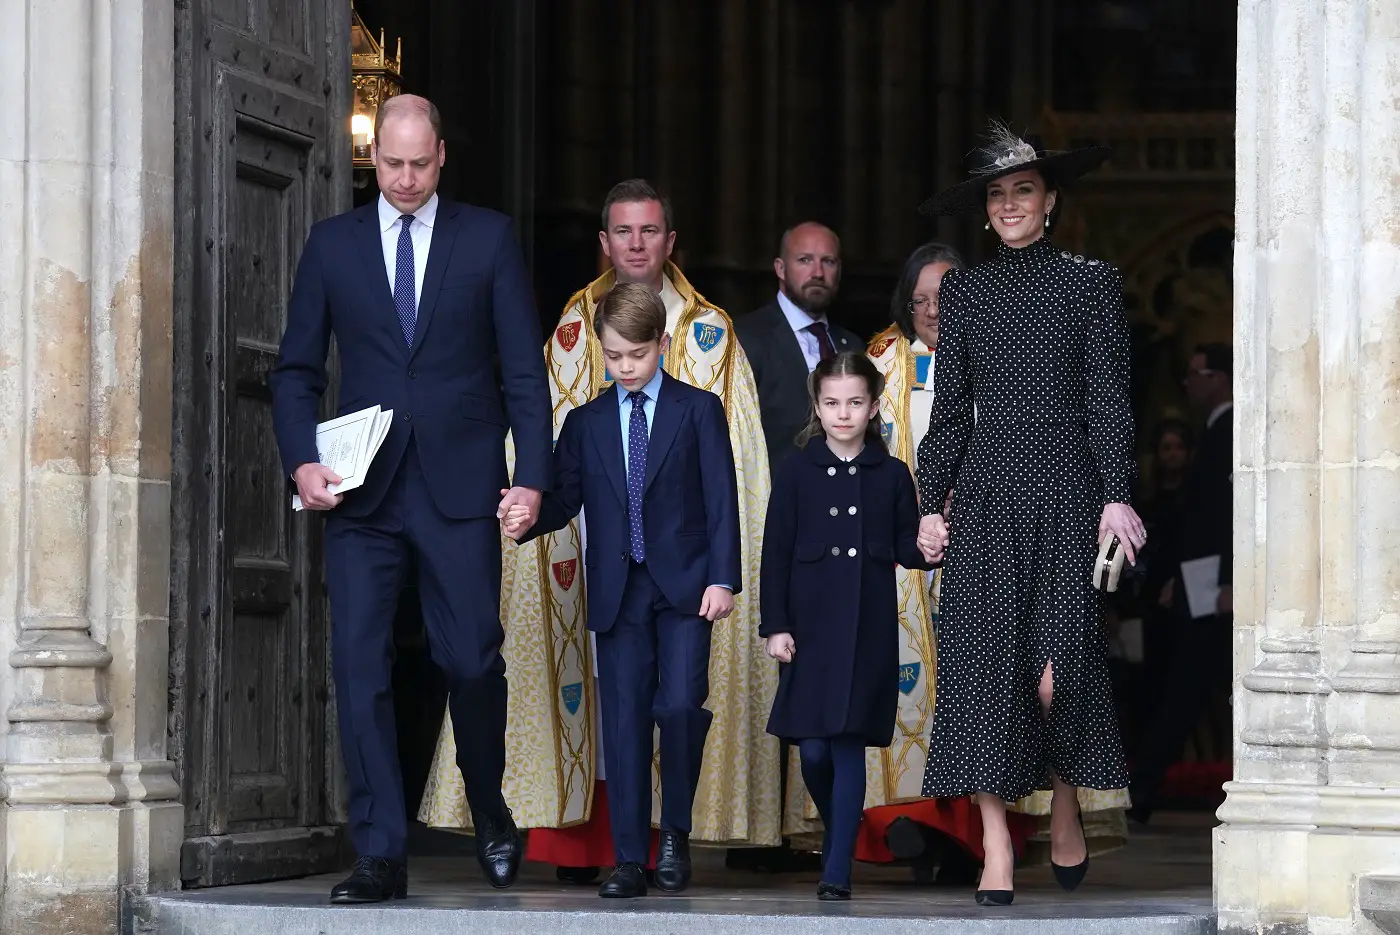 The Duke and Duchess of Cambridge attended the Thanksgiving service for the life of Prince Philip